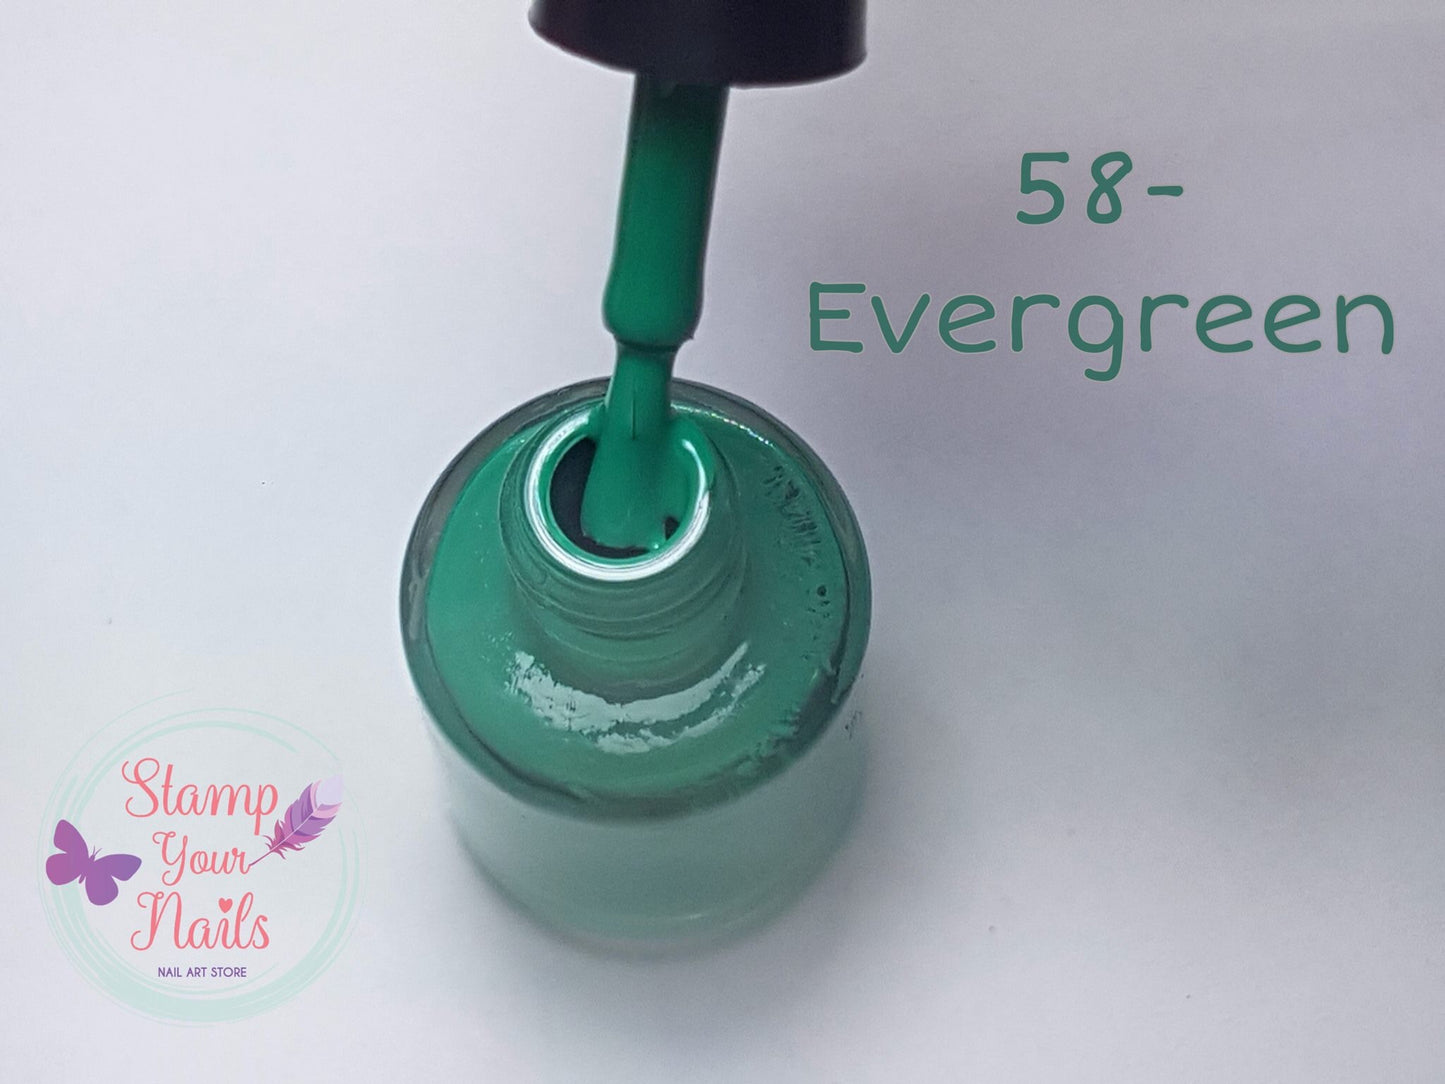 58 Evergreen - Stamp your nails